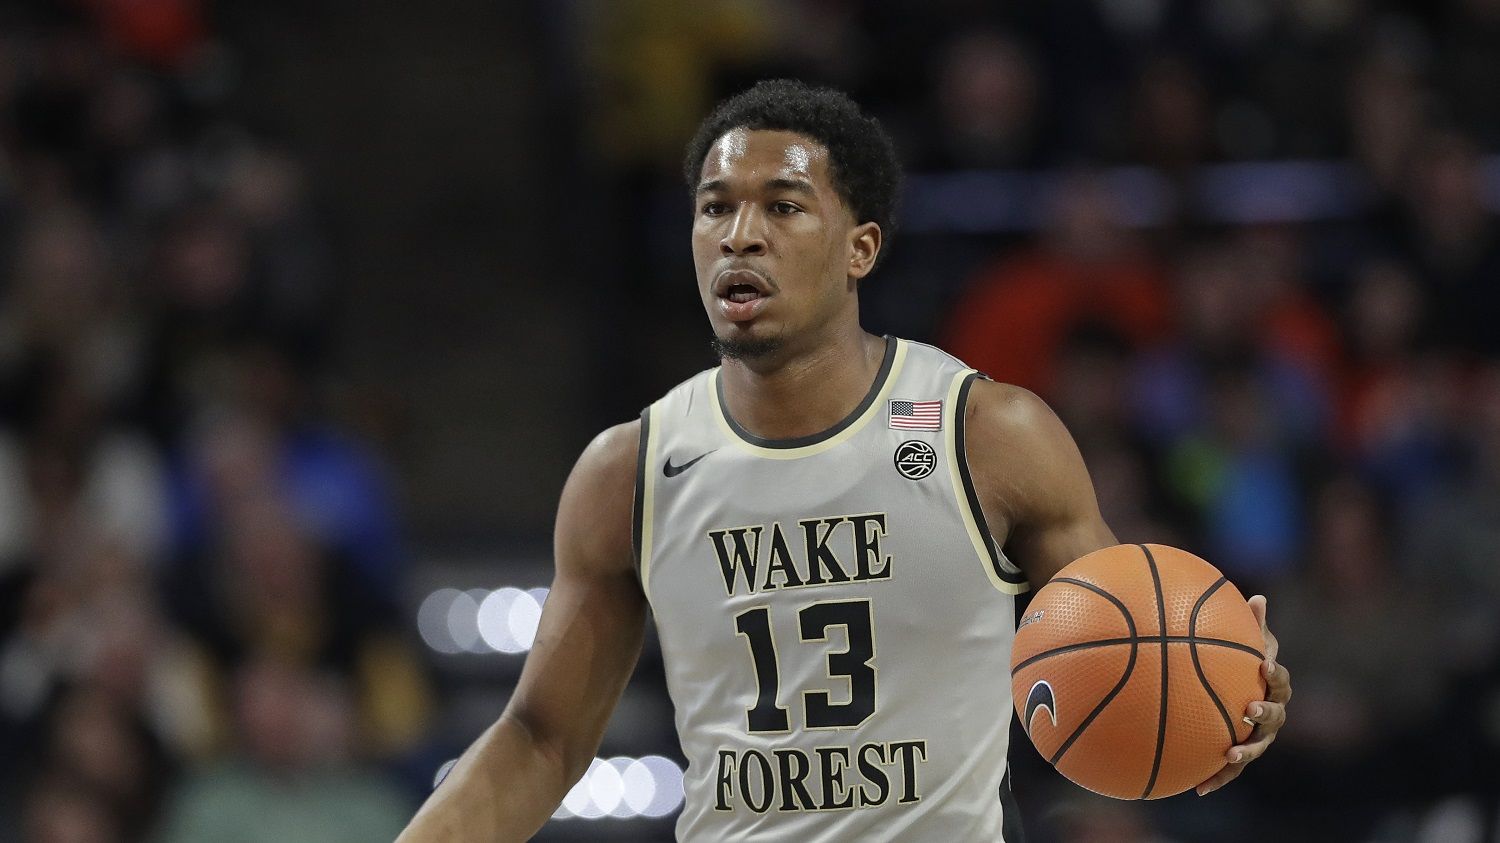 Wake Forest's Bryant Crawford (13) brings the ball up the court against Clemson during the first half of an NCAA college basketball game in Winston-Salem, N.C., Saturday, Feb. 3, 2018. (AP Photo/Chuck Burton)